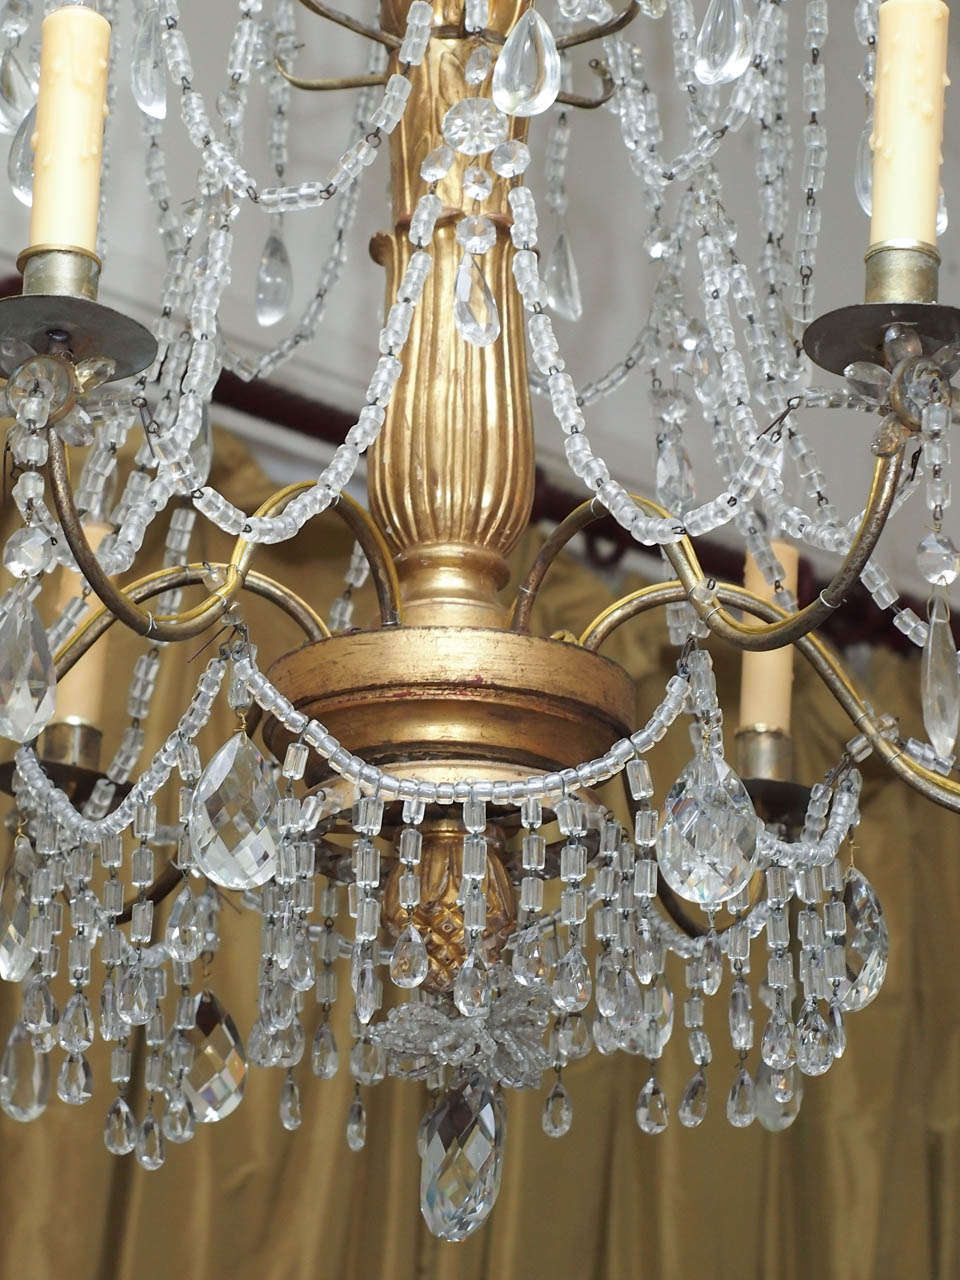 19th Century Italian Genovese Chandelier with Gilt Iron Arms And Wood Stem